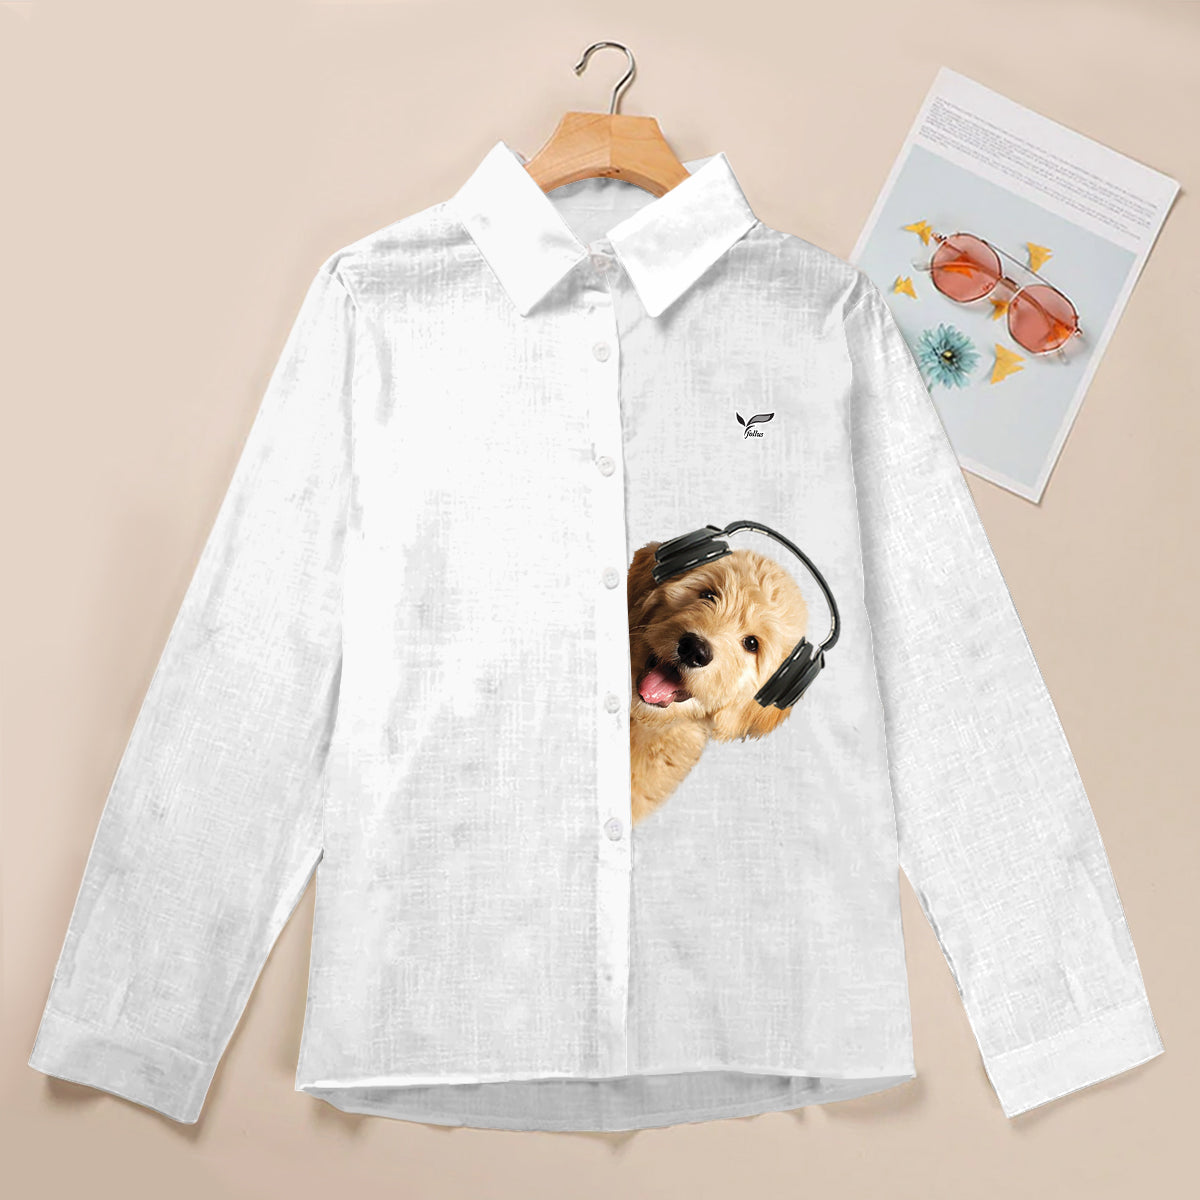 Great Music With Goldendoodle - Follus Women's Long-Sleeve Shirt V1